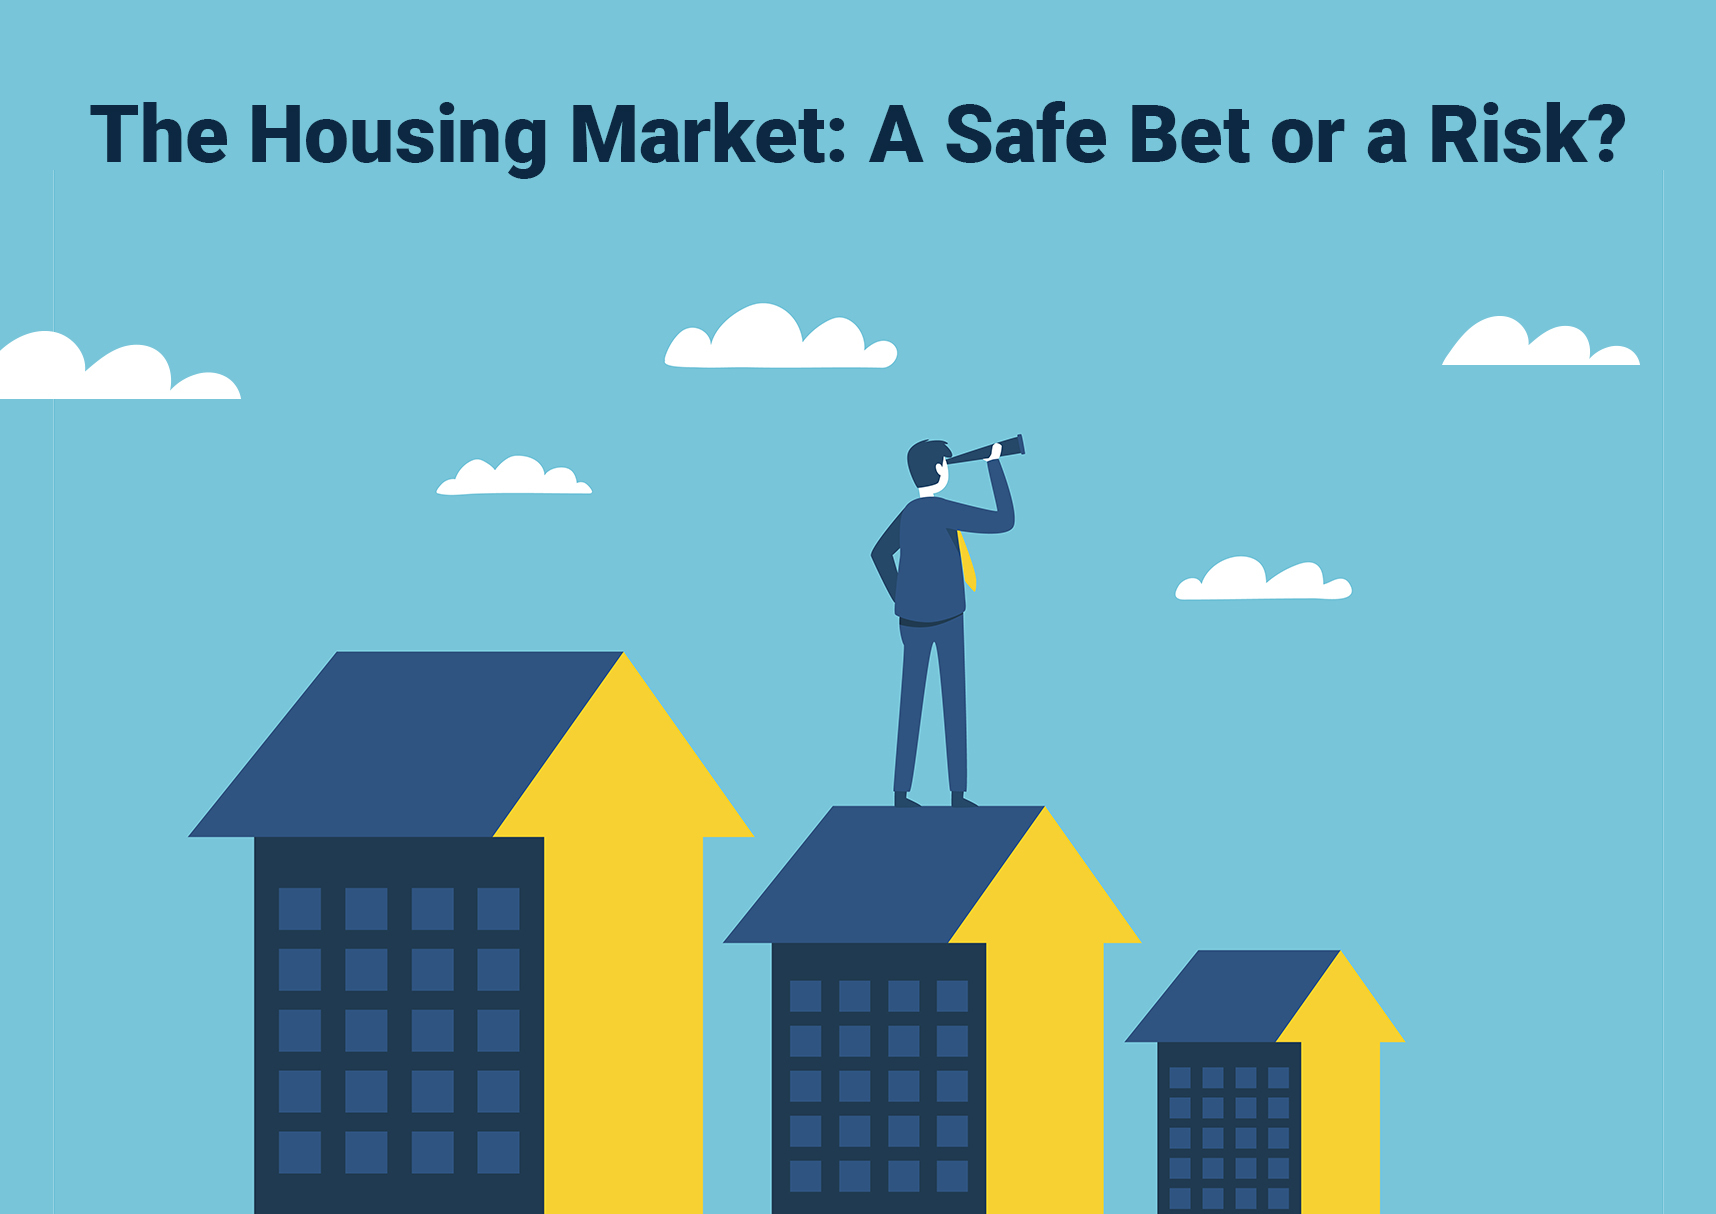 The Housing Market: A Safe Bet or a Risk?